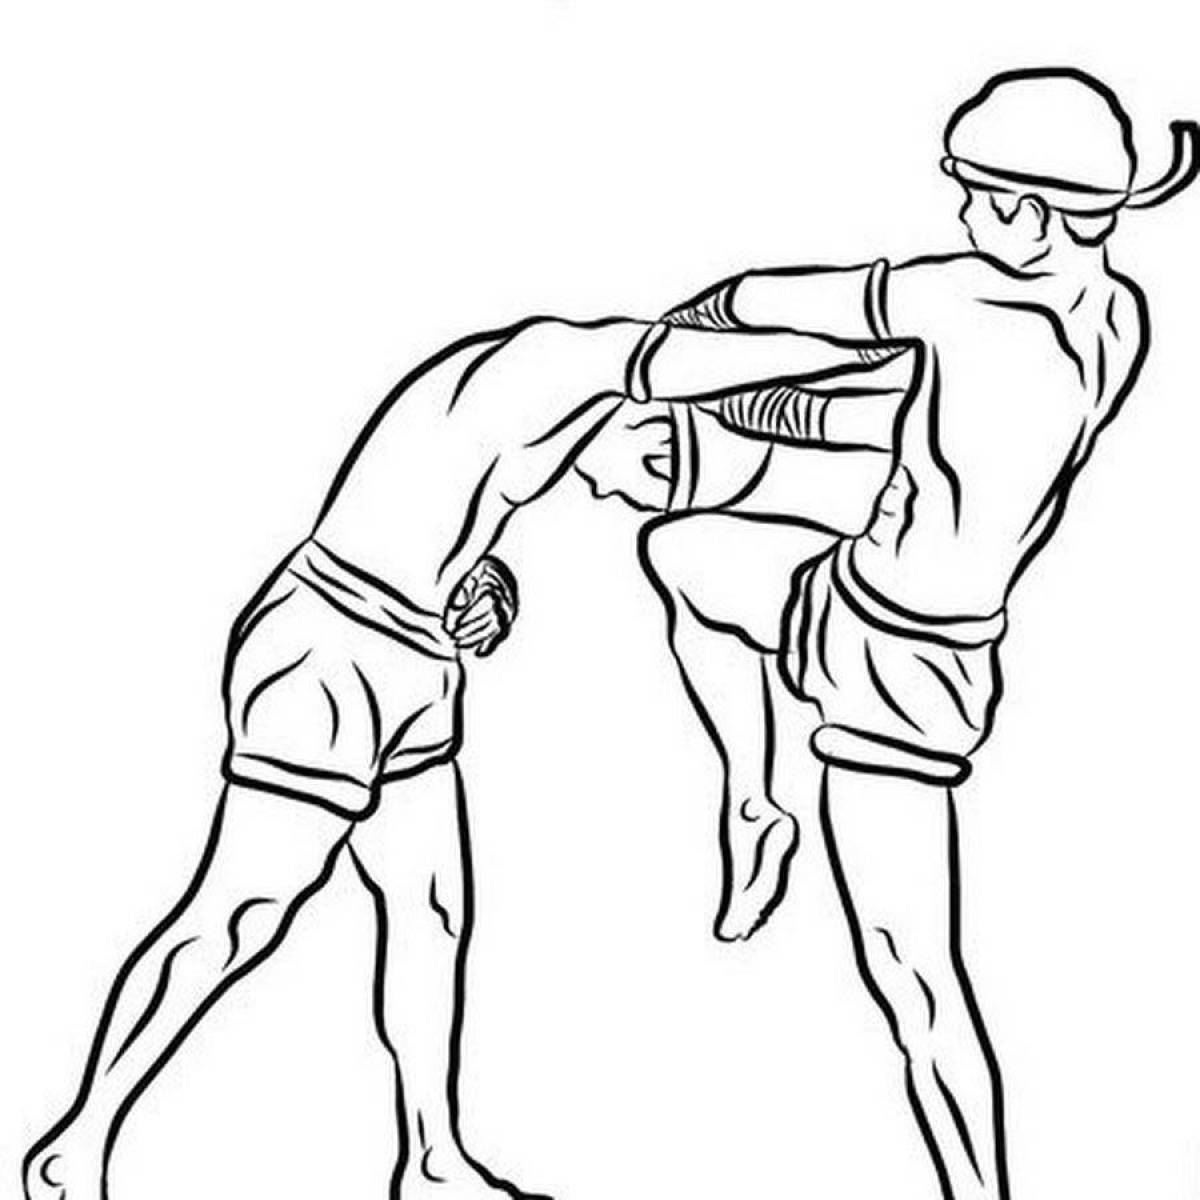 Playful kickboxing coloring page